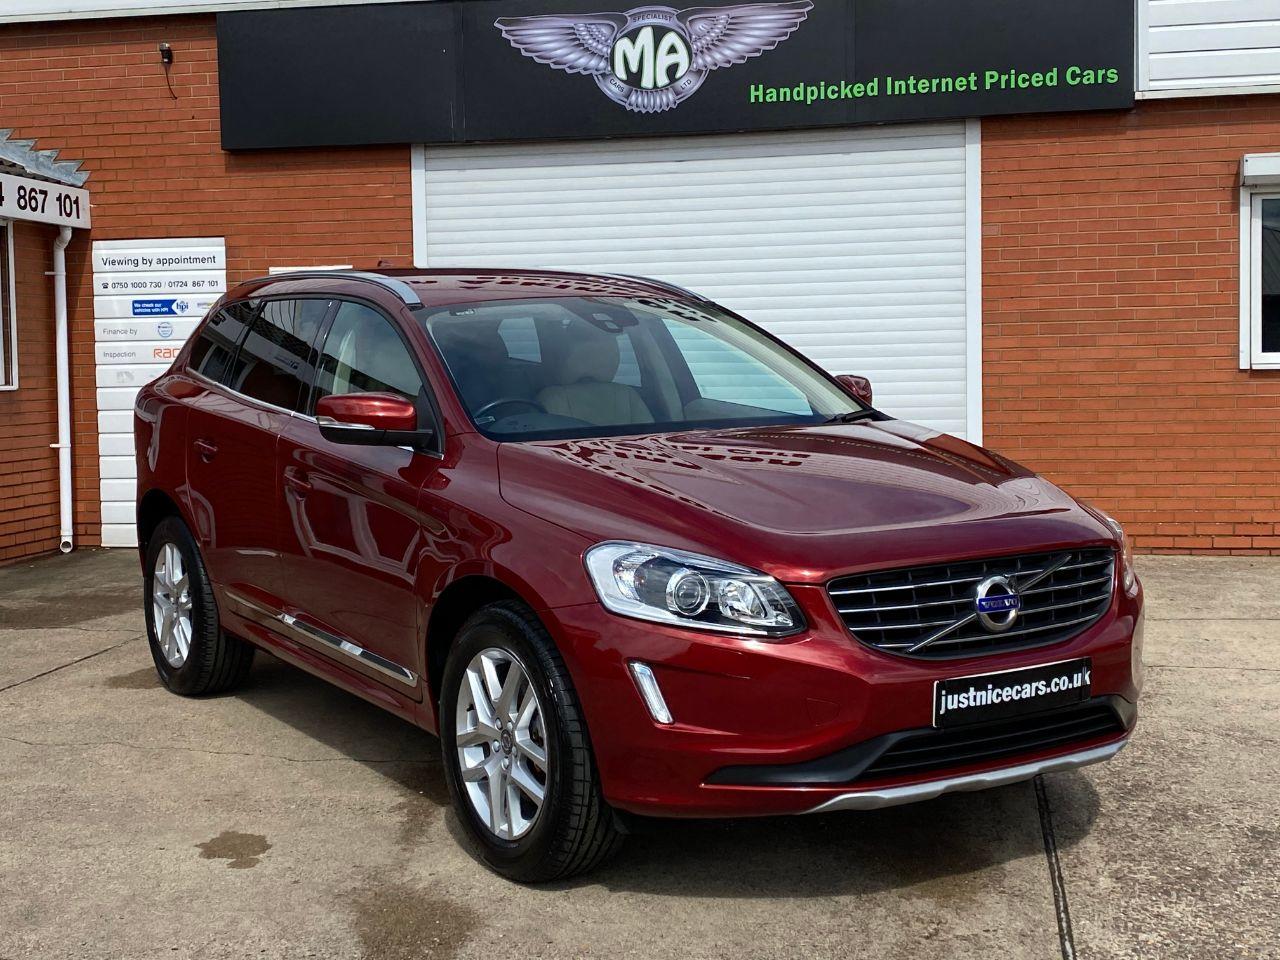 Volvo XC60 2.4 D4 SE Lux Nav 190BHP 5dr AWD Geartronic Automatic Estate Diesel Flamenco Red Metallic